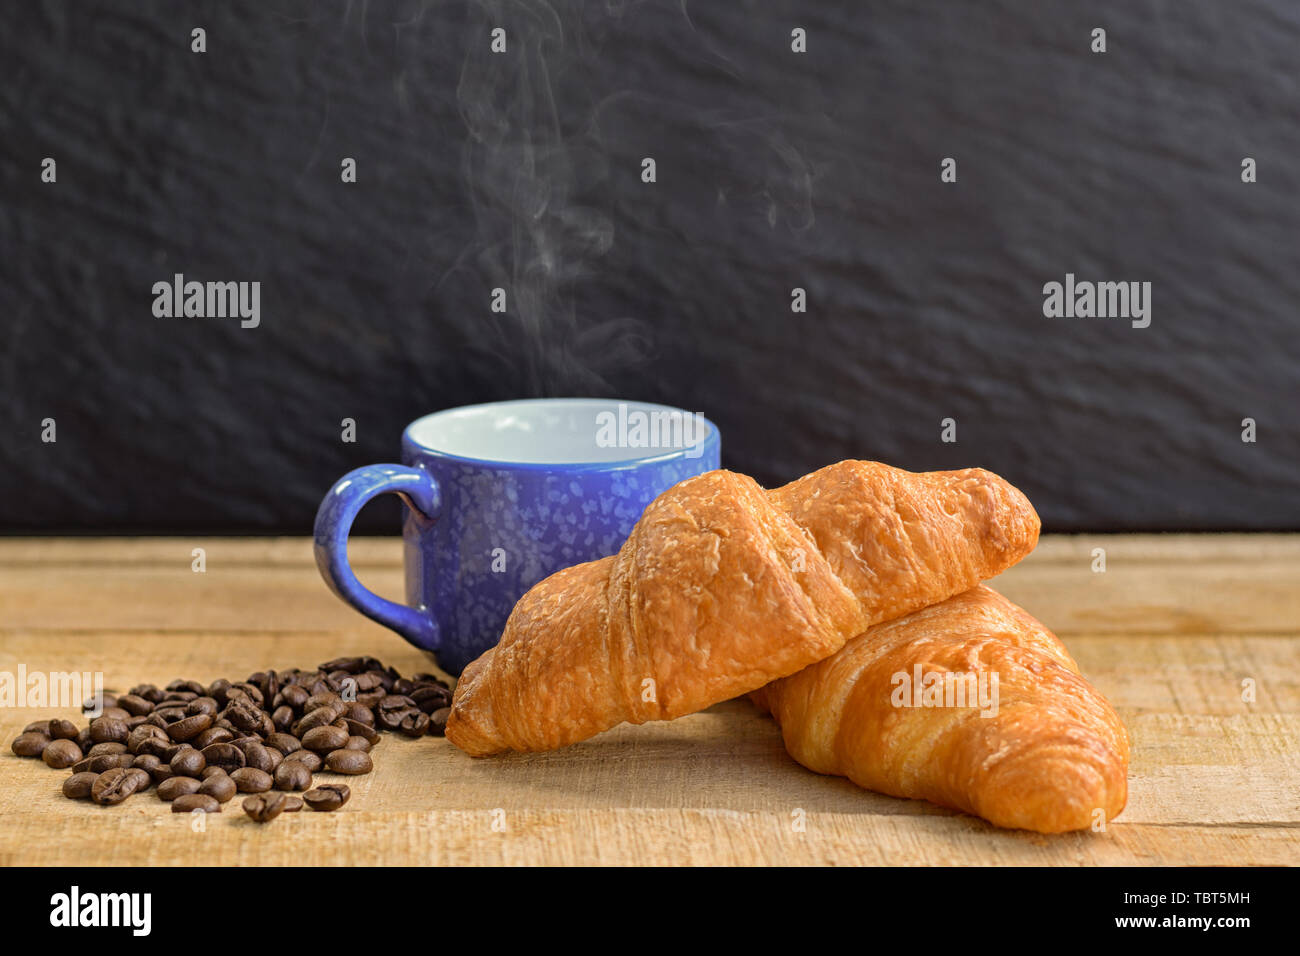 croissant and cup of coffee on wooden table Stock Photo